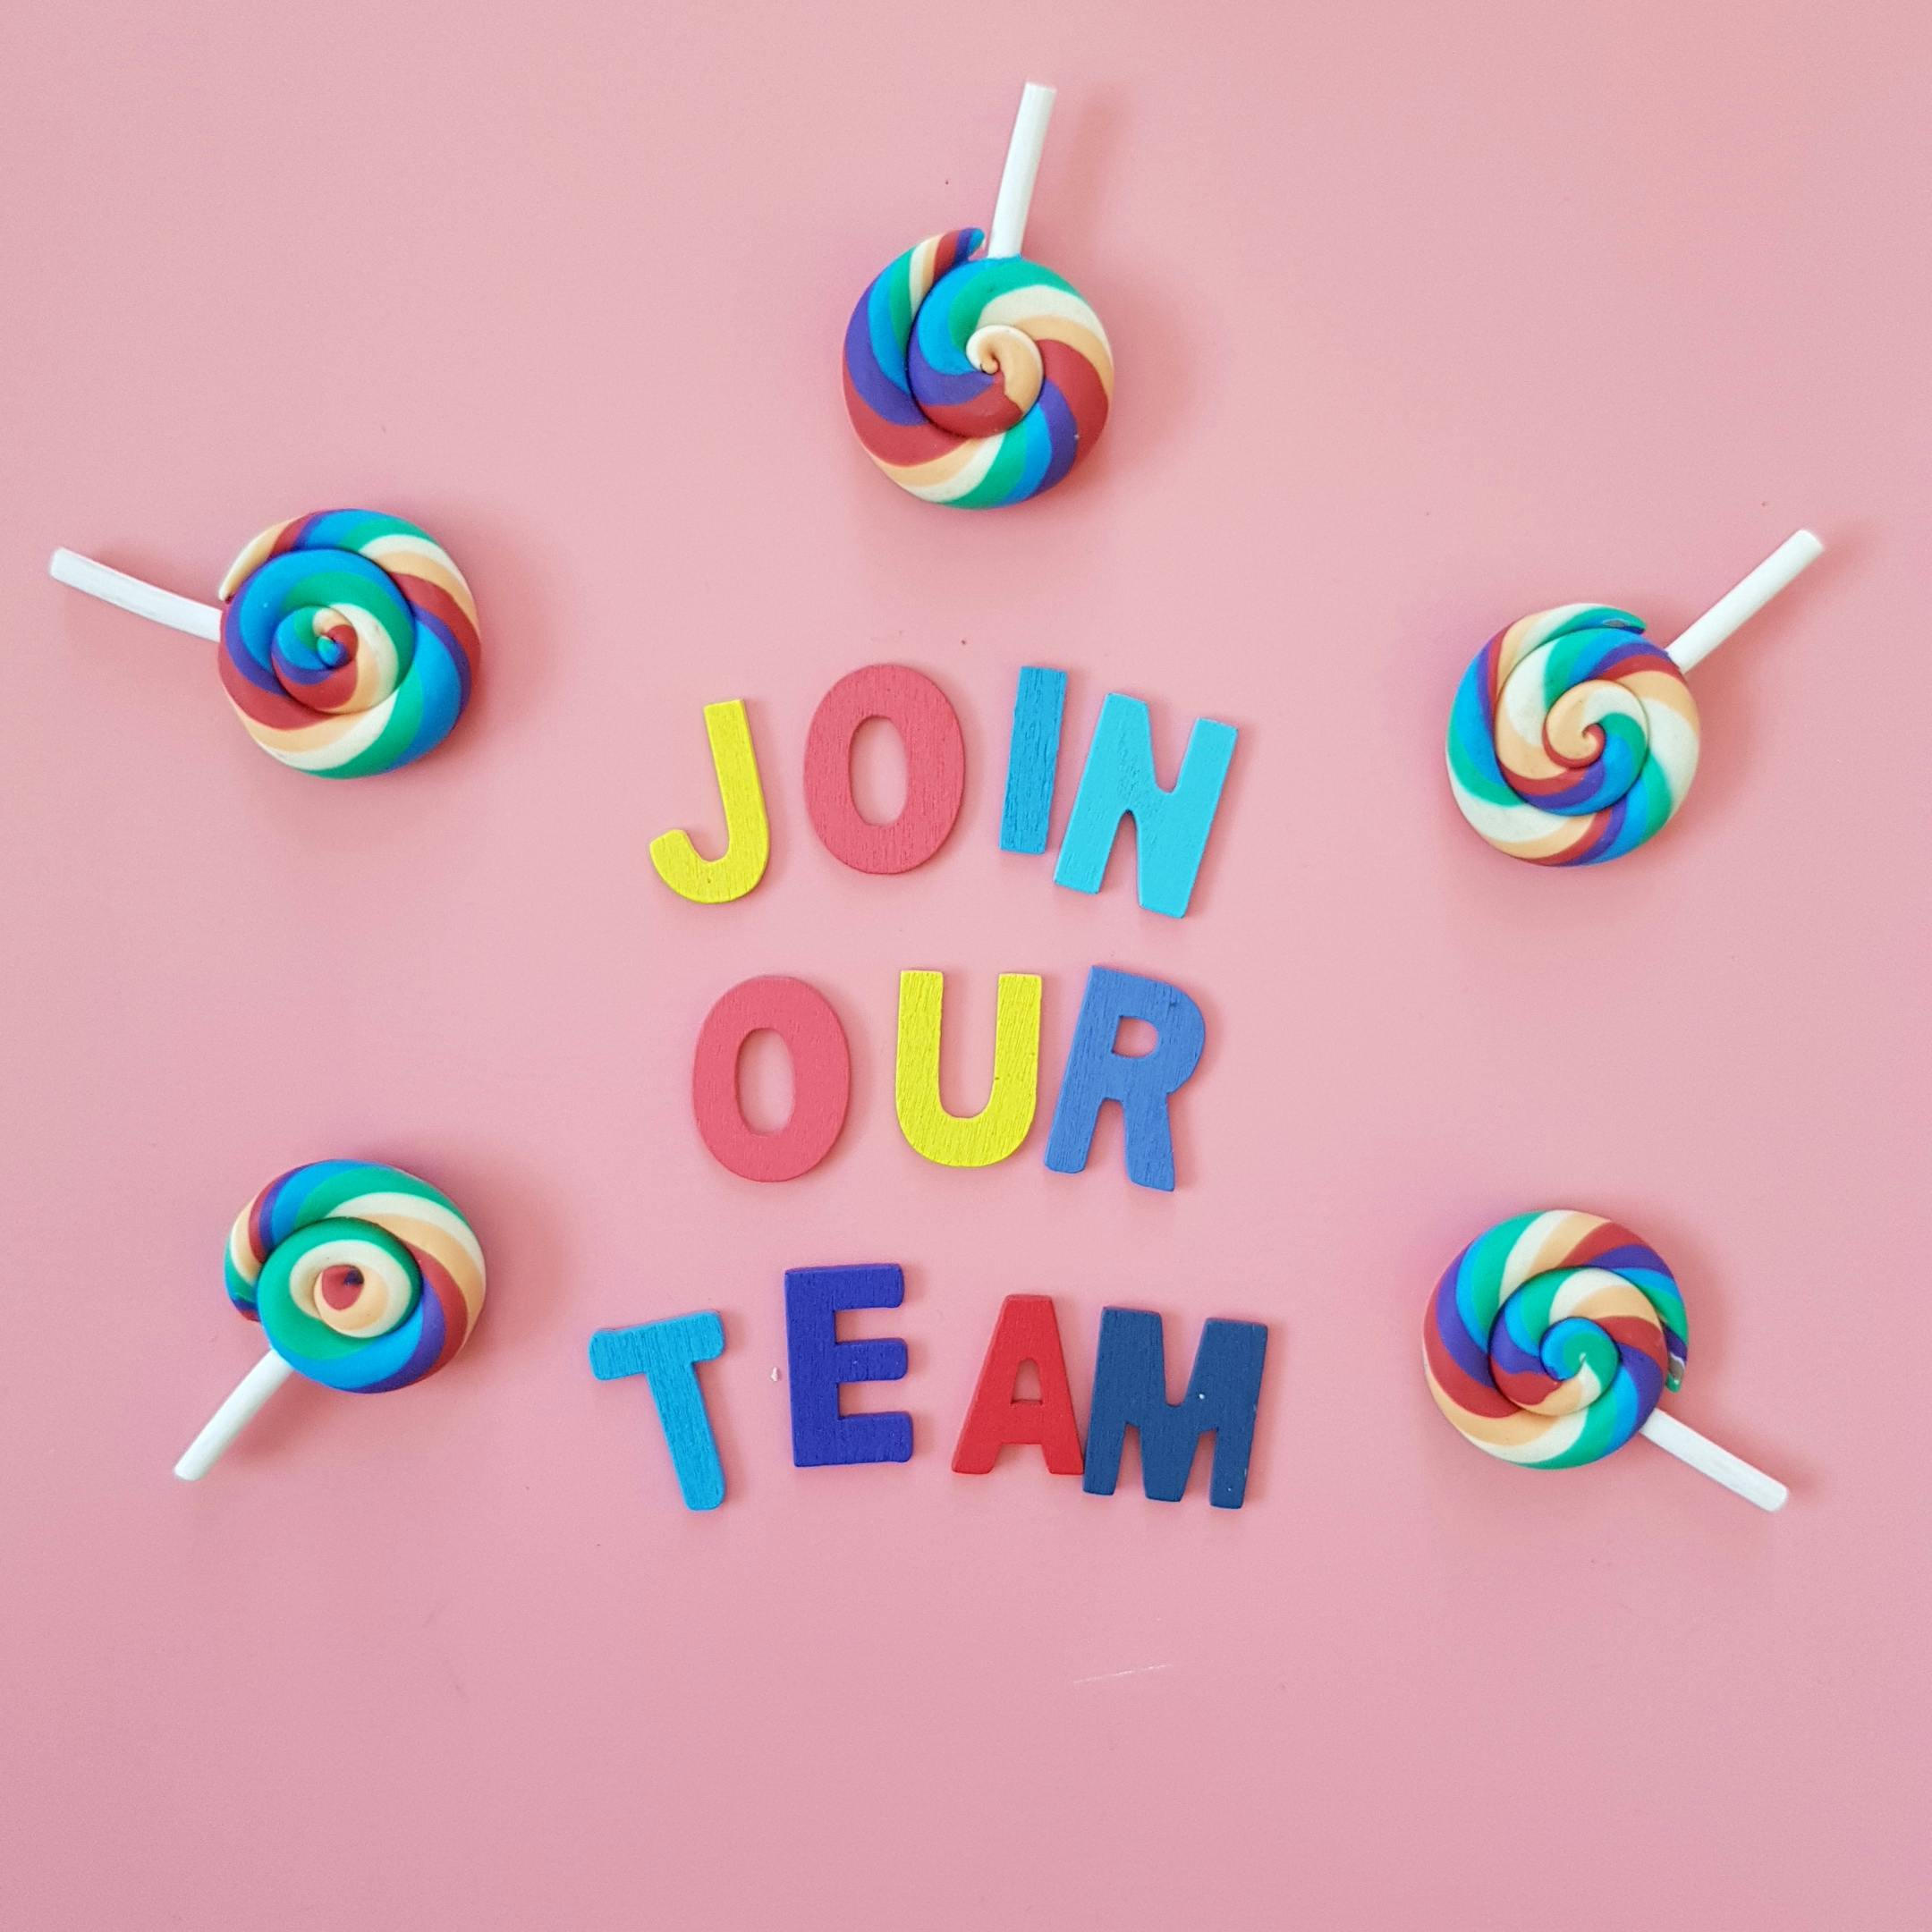 Join our team, with lollipops around the words